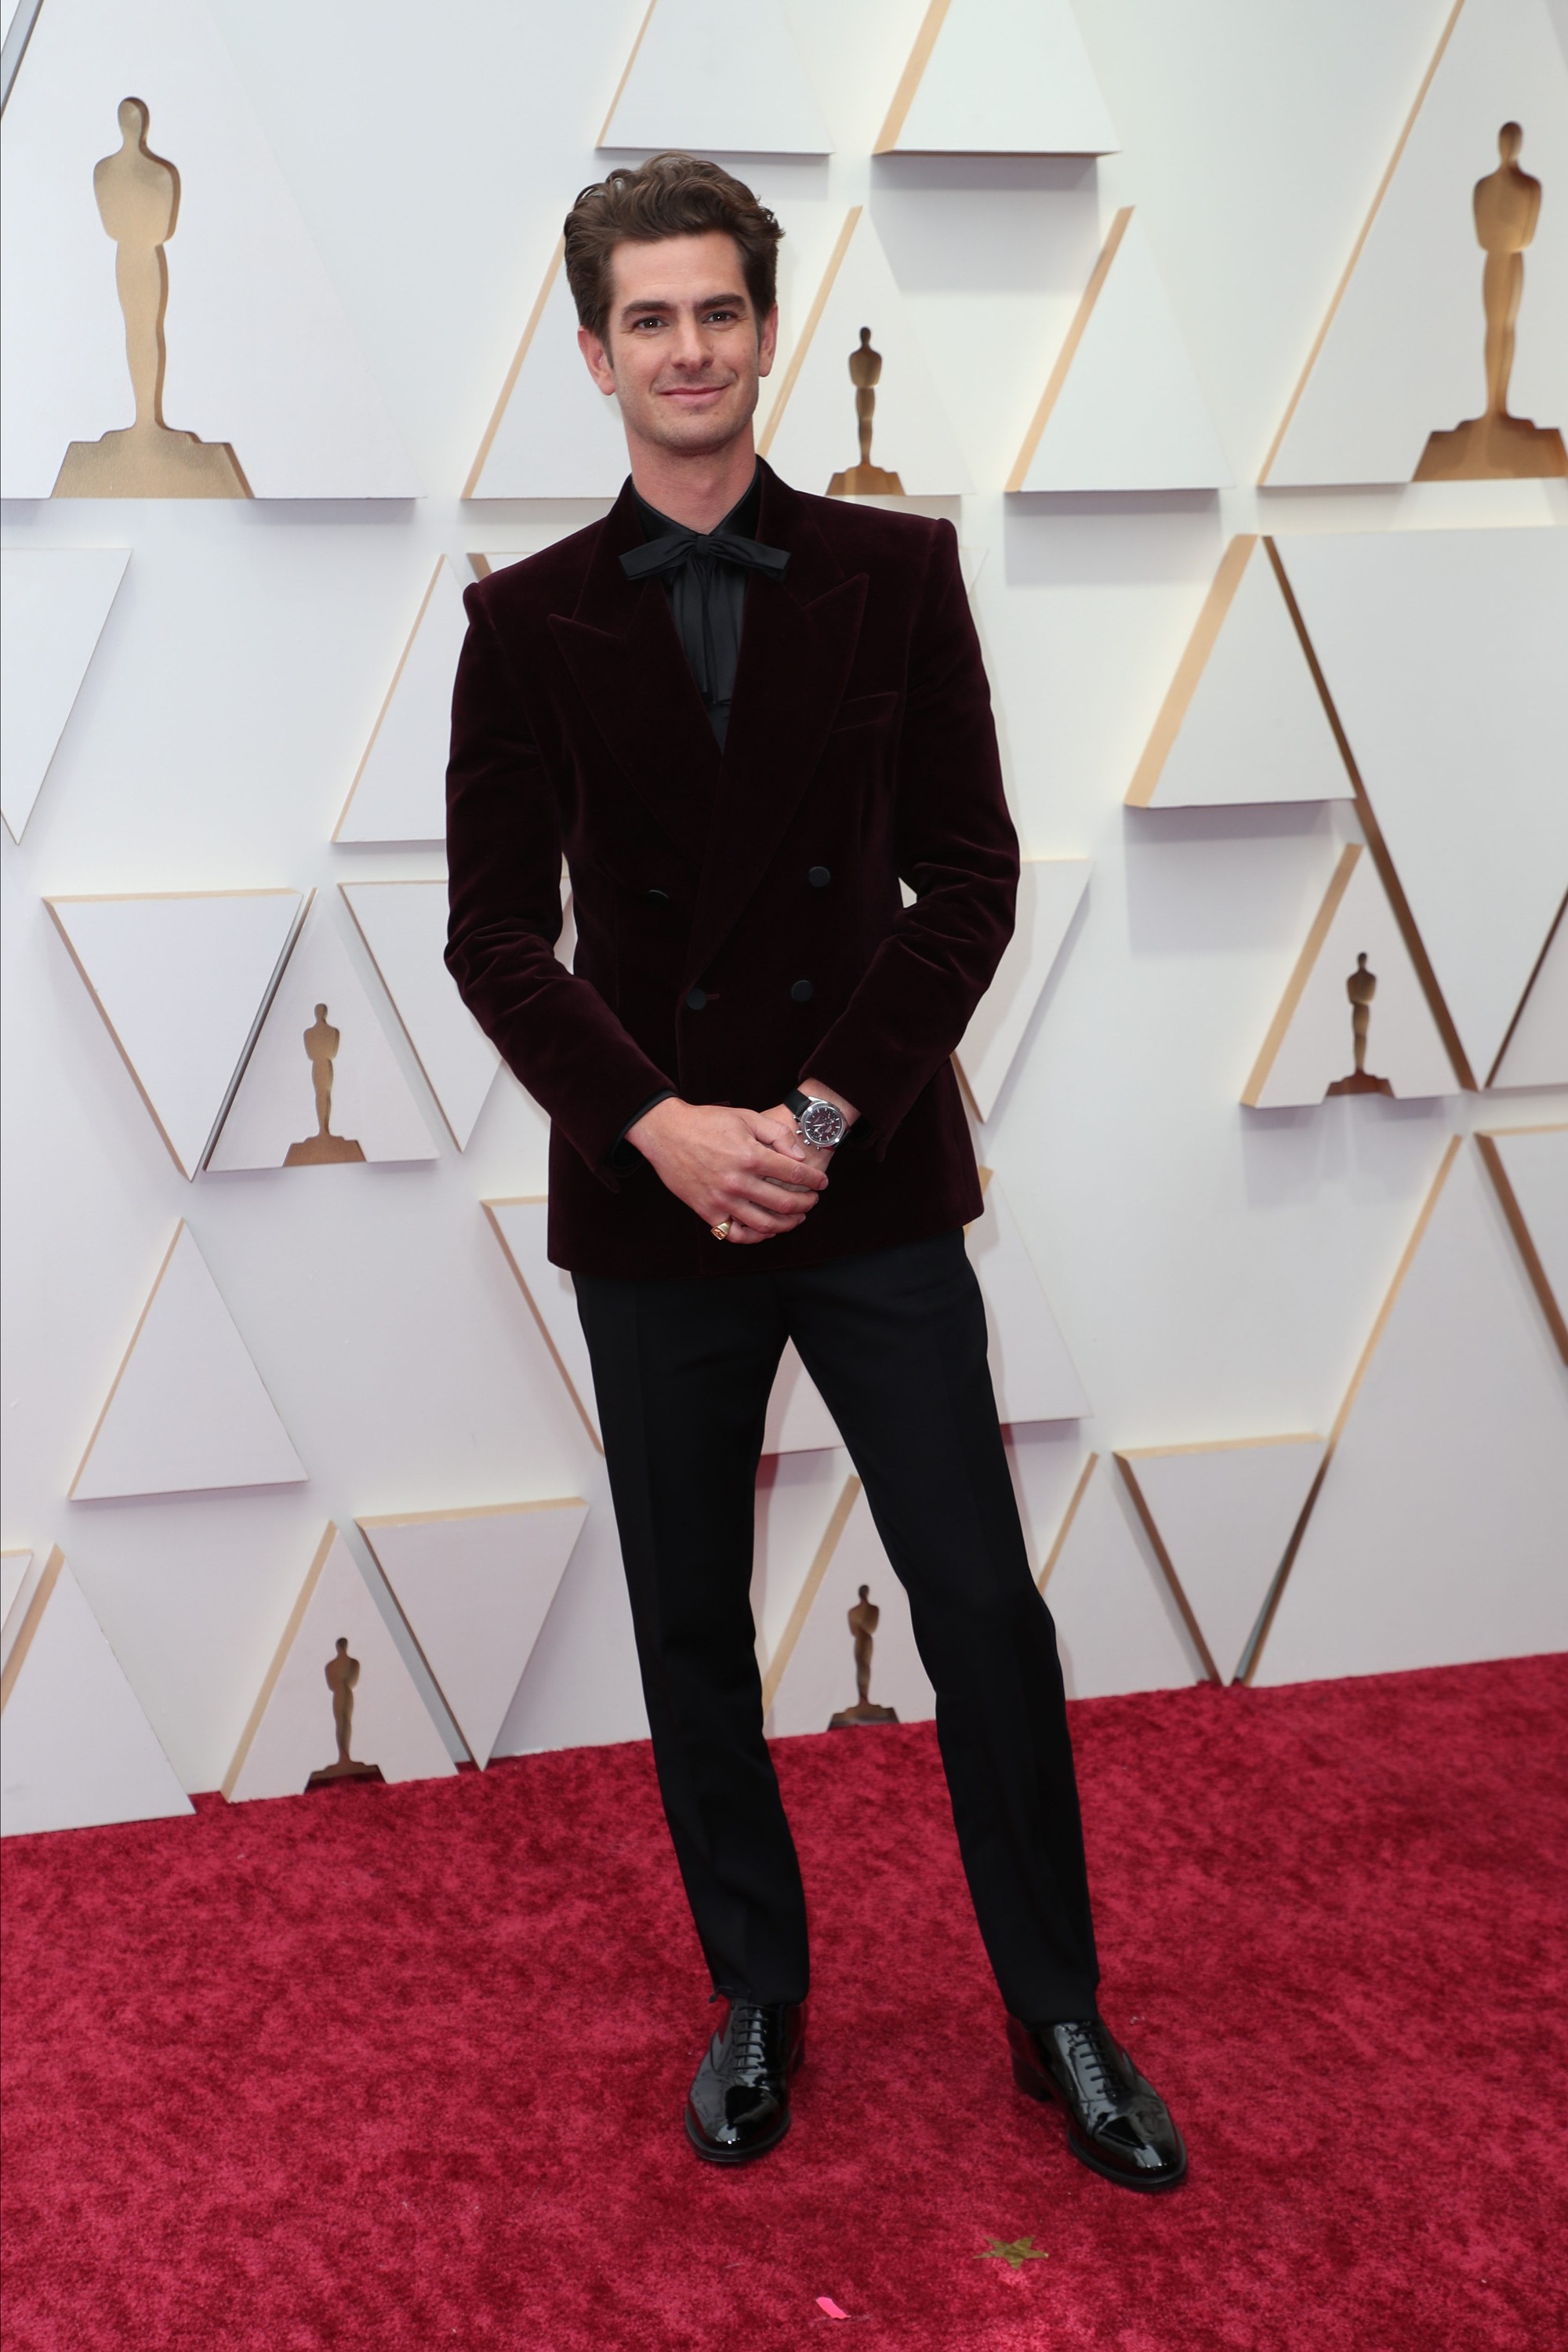 THE OSCARS®  The 94th Oscars® aired live Sunday March 27, from the Dolby® Theatre at Ovation Hollywood at 8 p.m. EDT/5 p.m. PDT on ABC in more than 200 territories worldwide. (ABC via Getty Images)ANDREW GARFIELD (Foto: ABC via Getty Images)